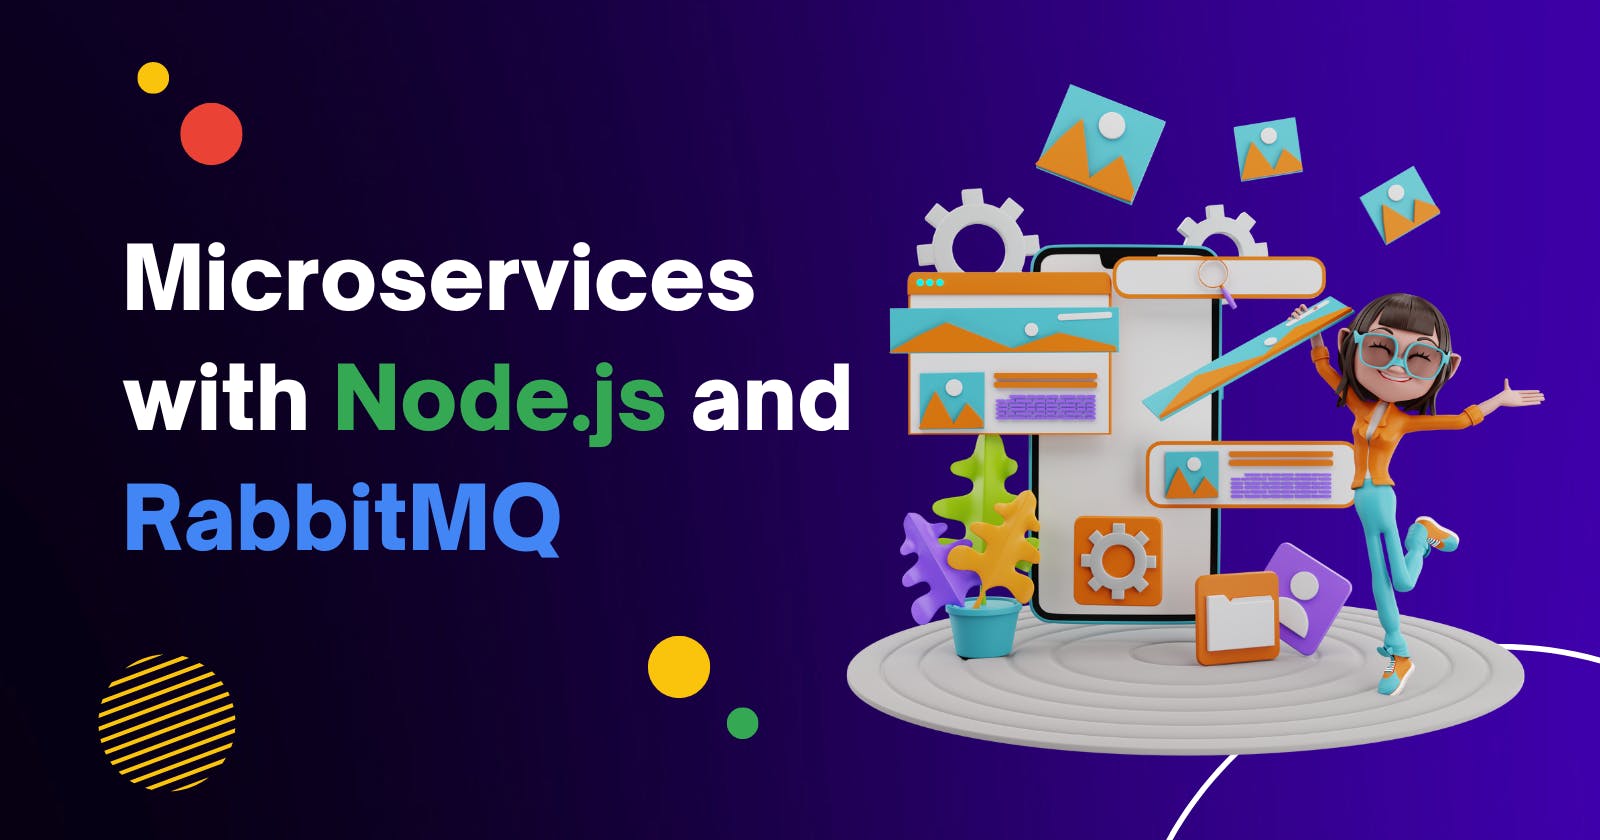 Microservices 101 with Node.js and RabbitMQ